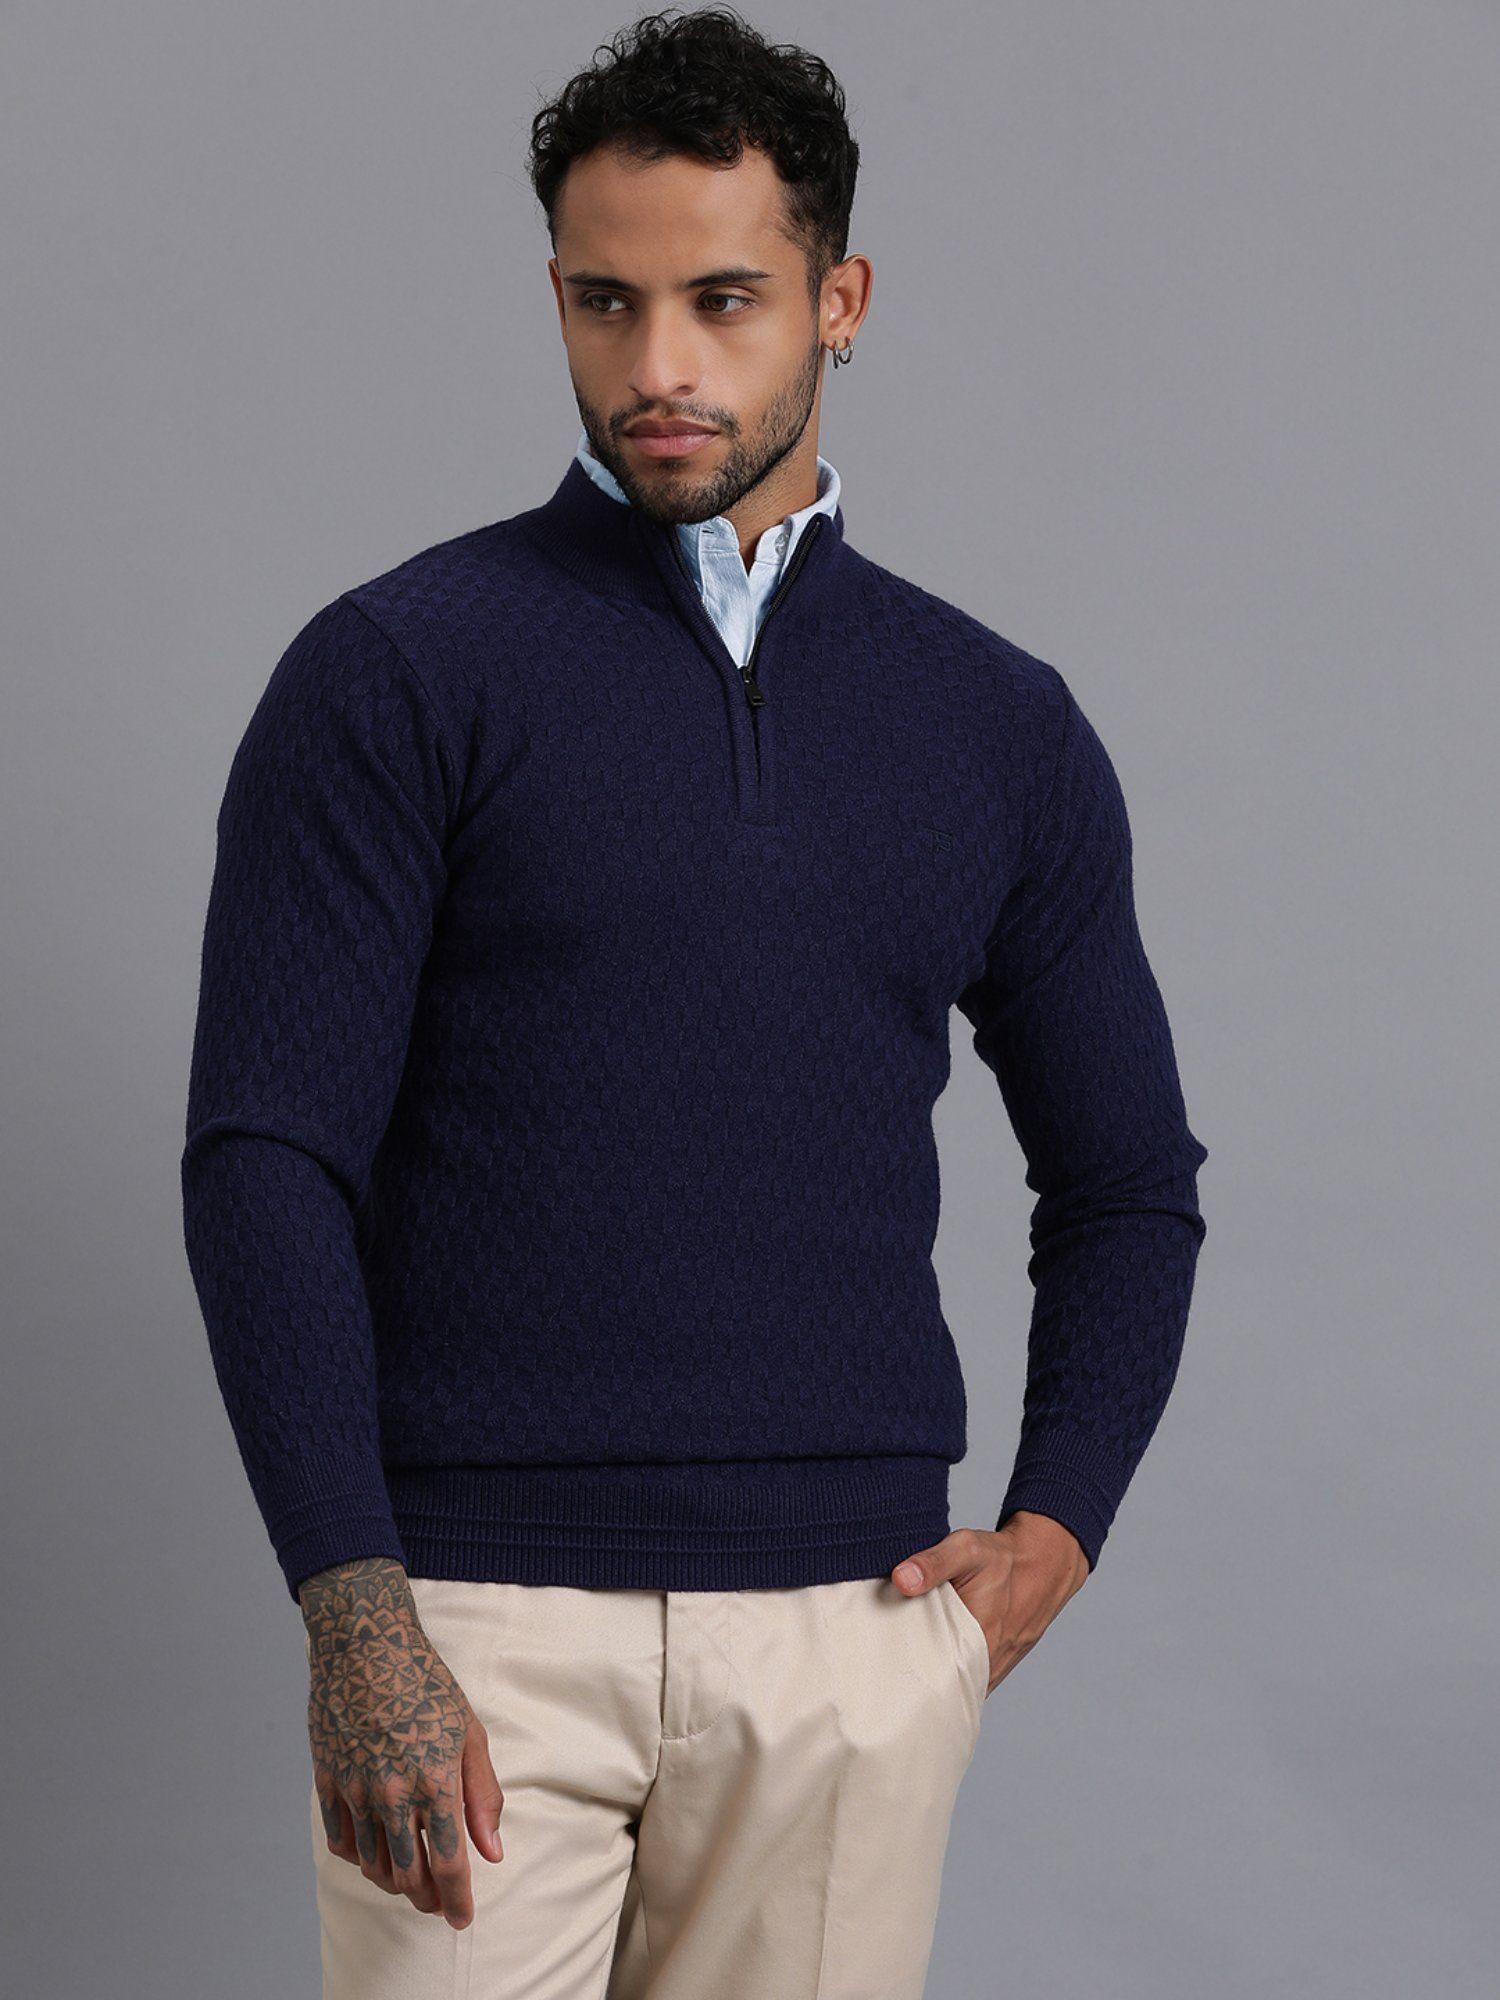 navy blue half zipper luxury cable knitted mens wool pullover sweater